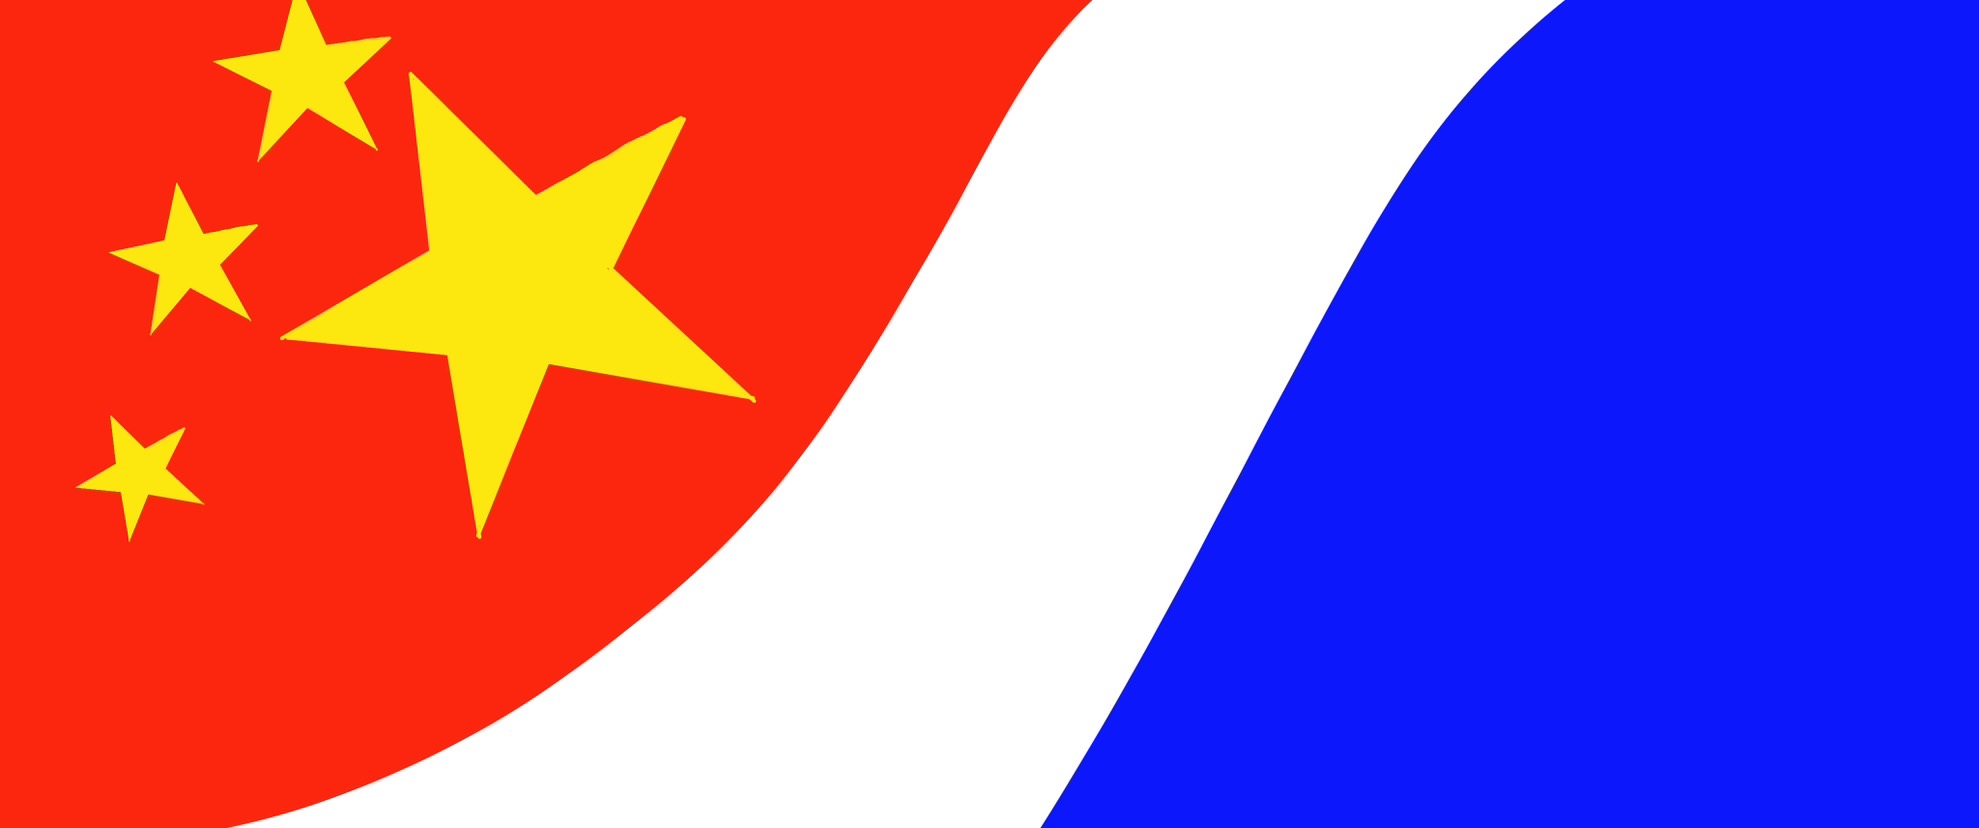 A red white and blue flag Description automatically generated